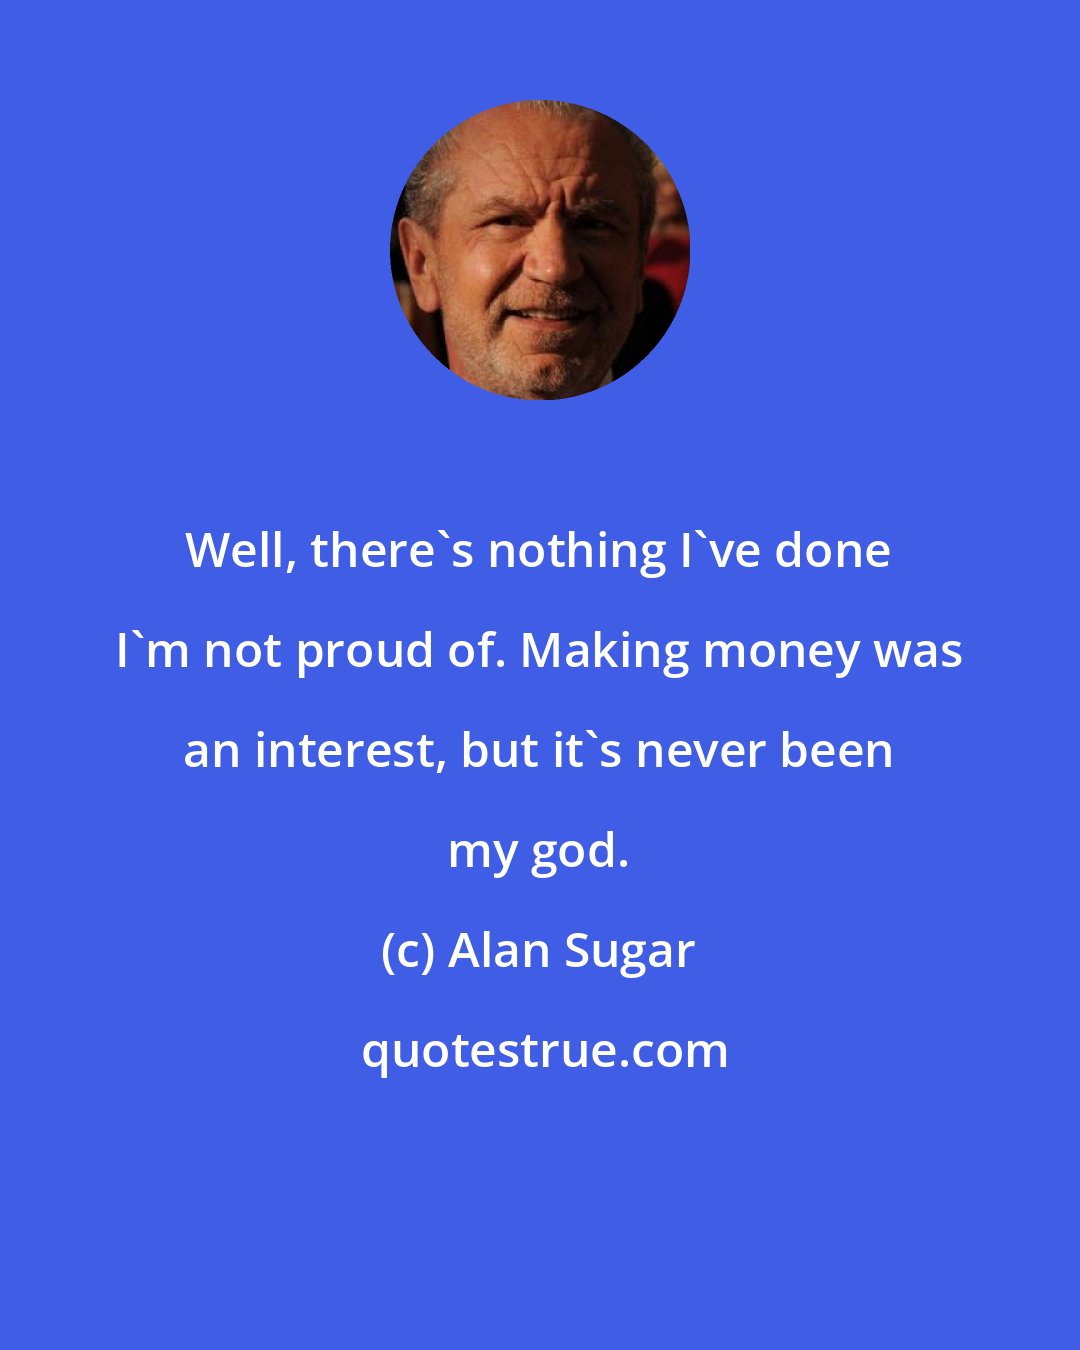 Alan Sugar: Well, there's nothing I've done I'm not proud of. Making money was an interest, but it's never been my god.